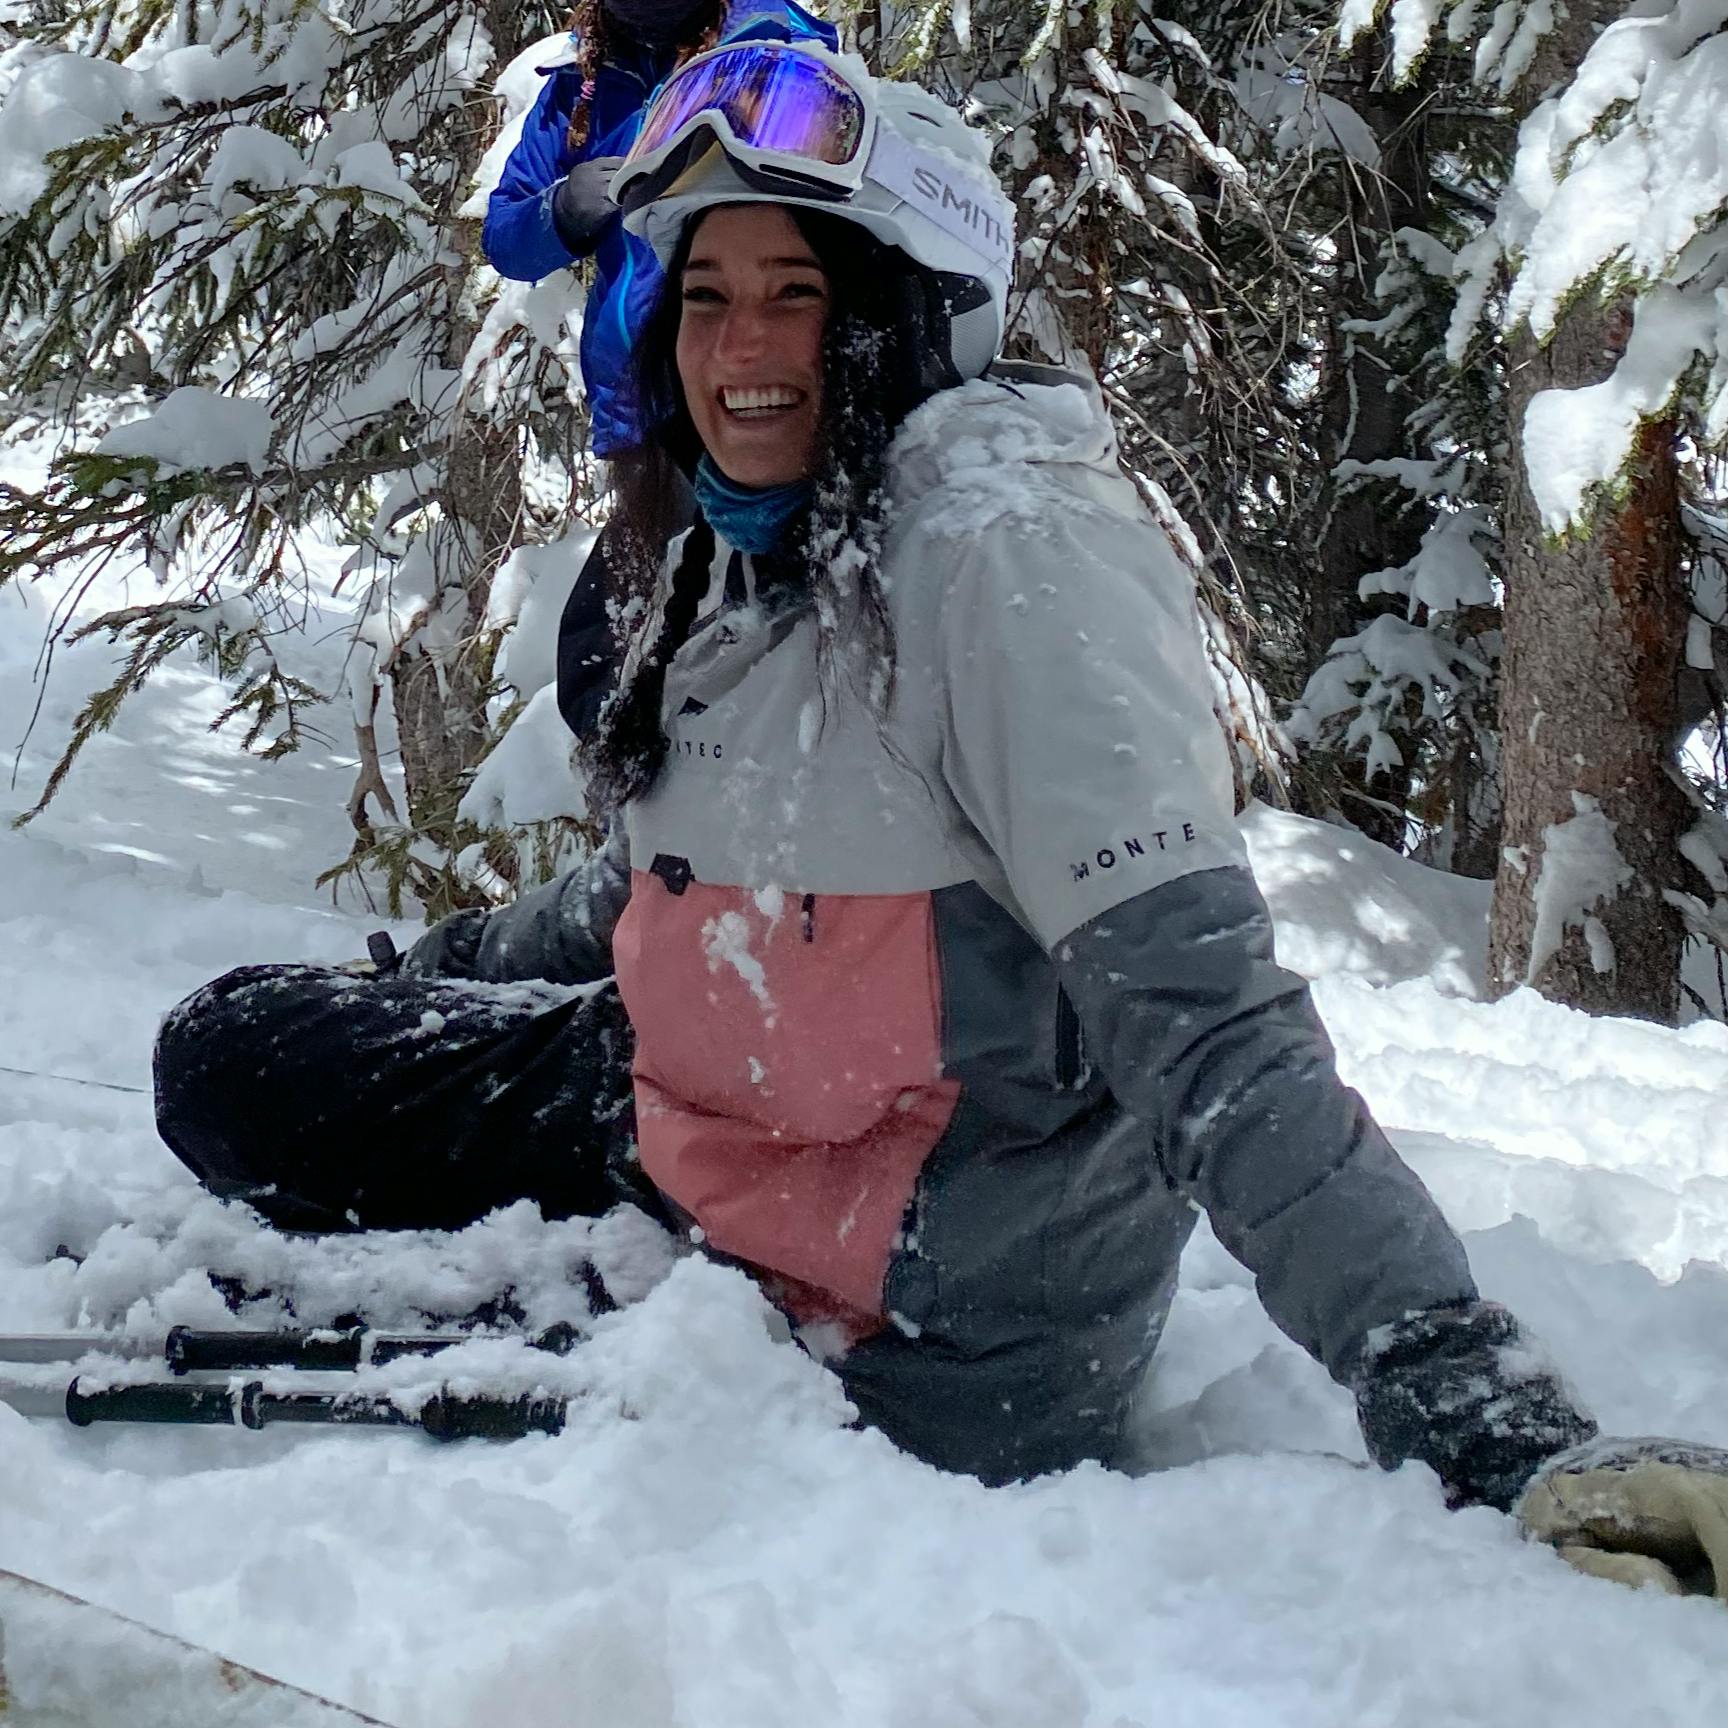 Expert Review: The North Face Women's Freedom Insulated Bib Pants